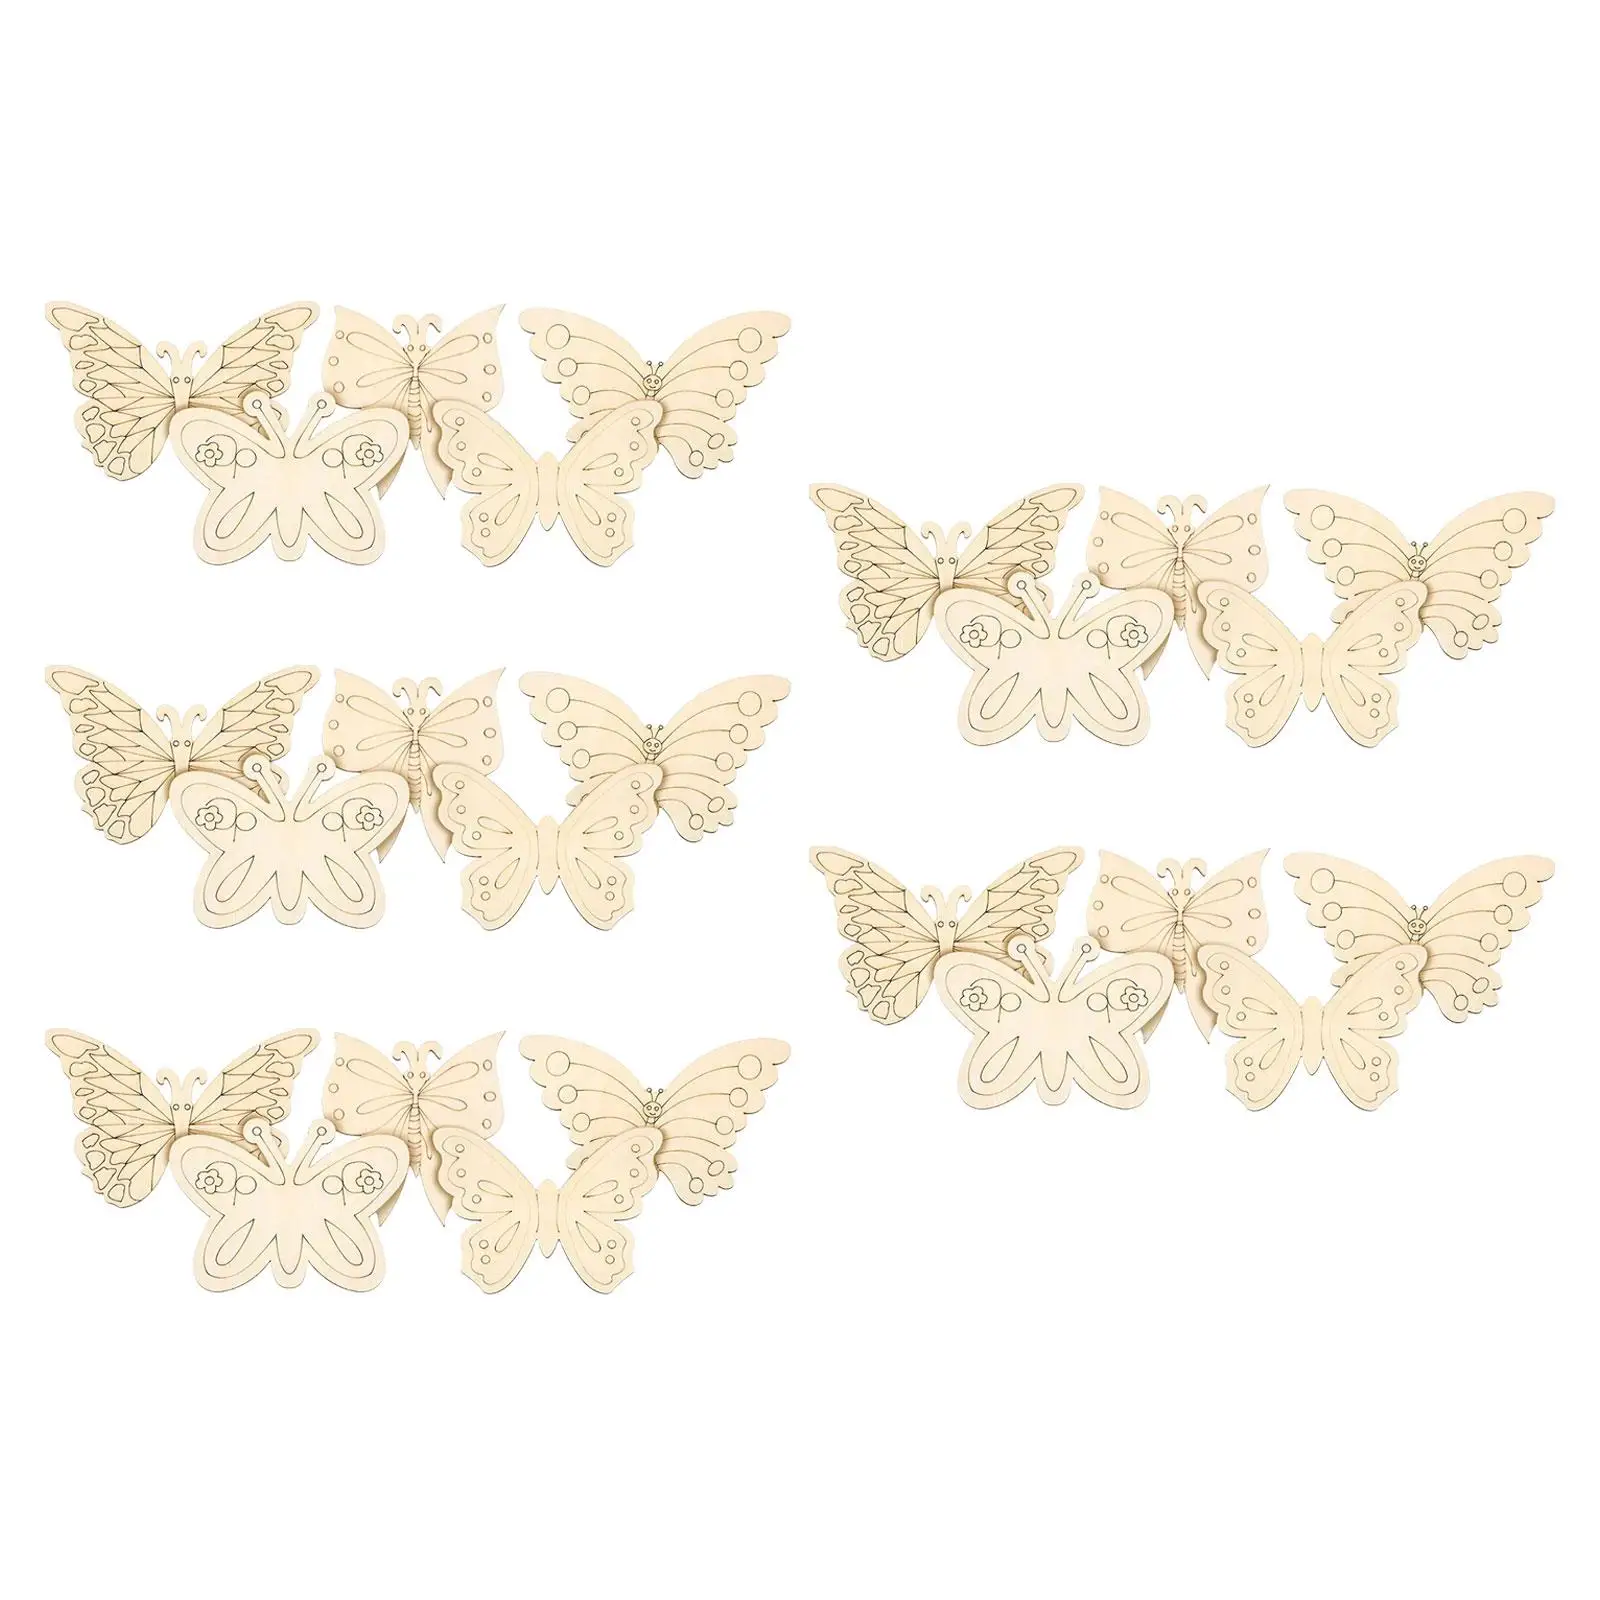 25x Wooden Butterfly Cutouts Wooden Pieces Ornament Butterfly Shaped Wood Slices Wood Chips for DIY Crafts Wedding Home Decor